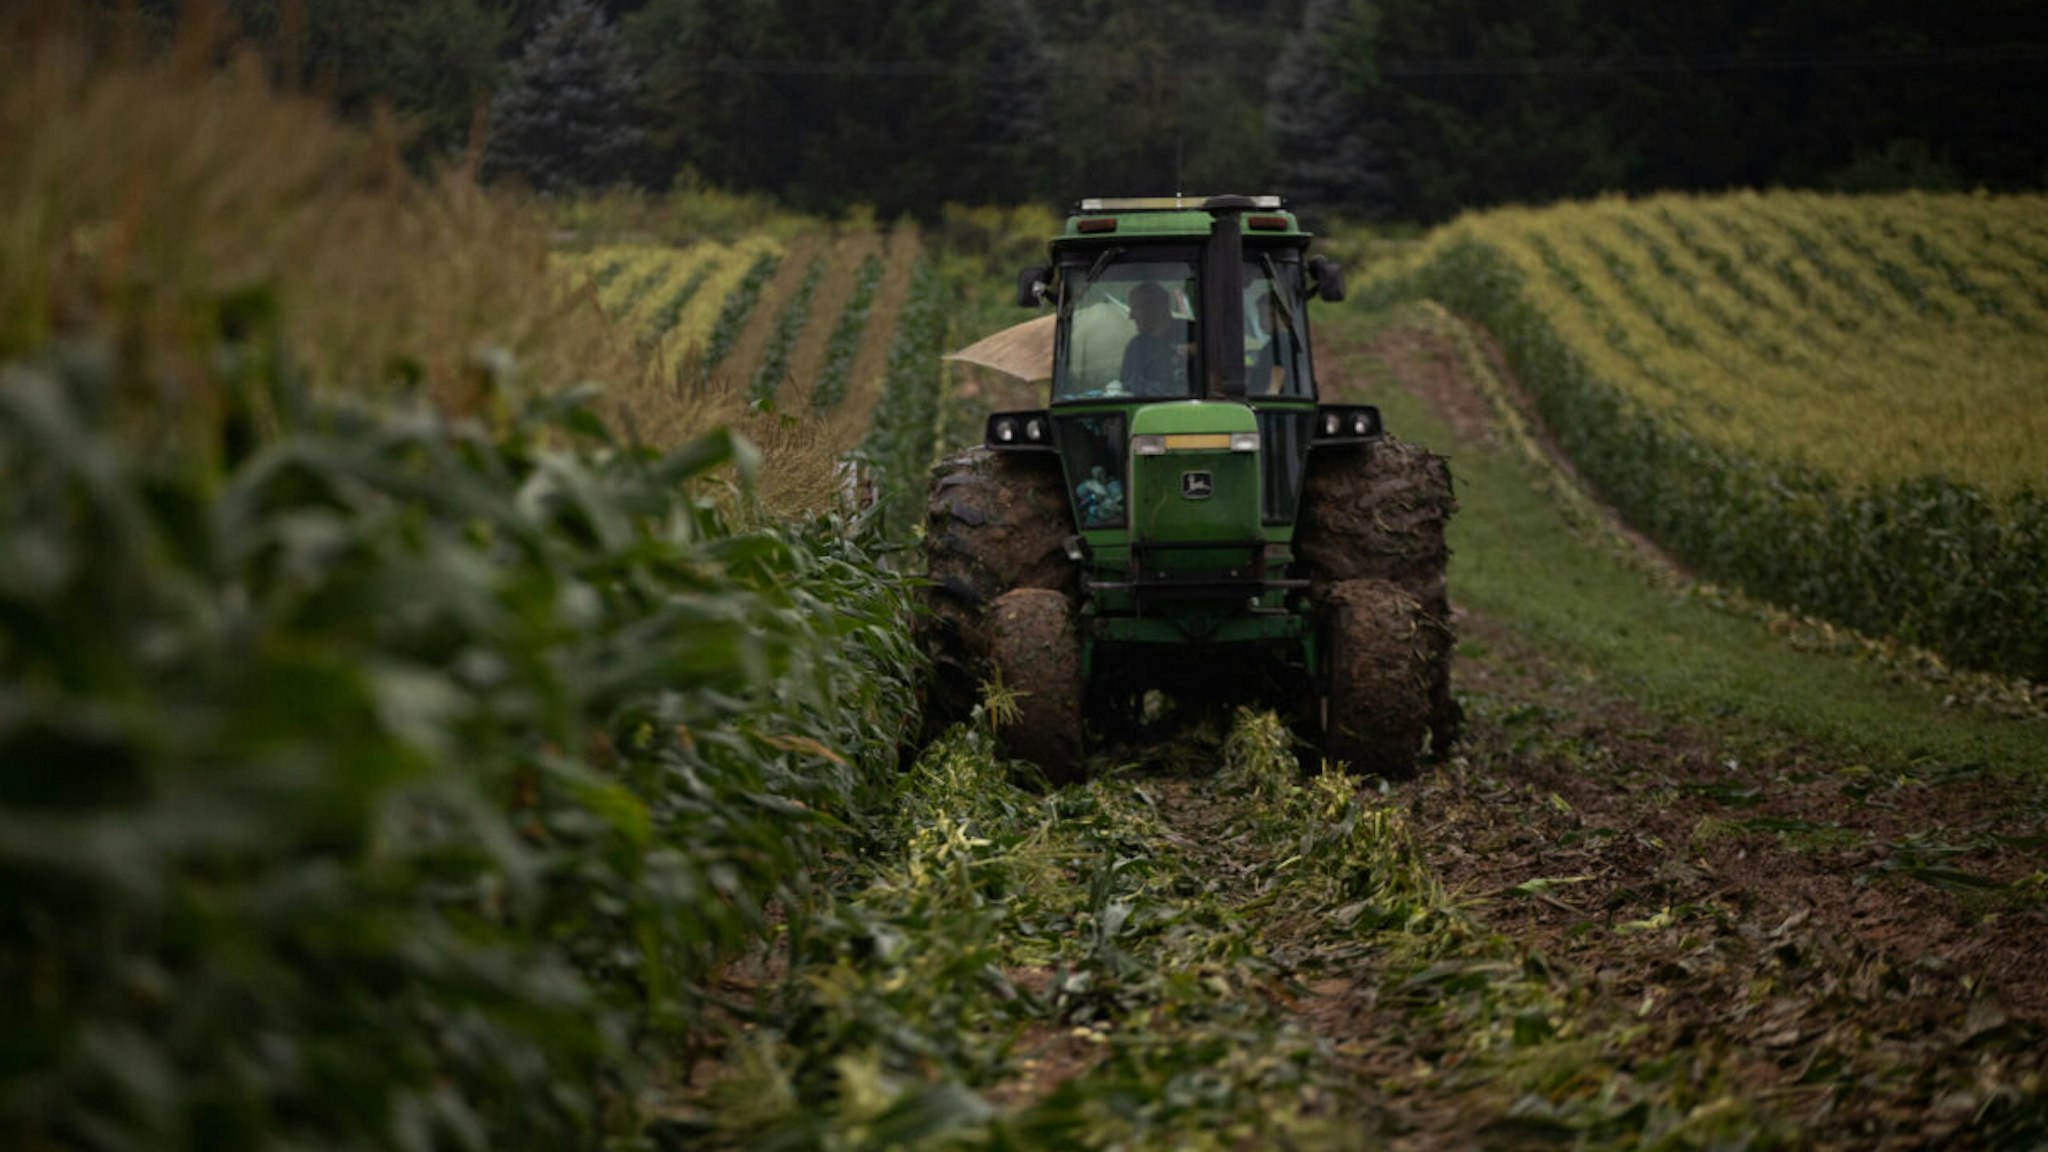 A tractor drives through corn fields at a farm in Lansing, Michigan, U.S., on Thursday, Aug. 12, 2021.